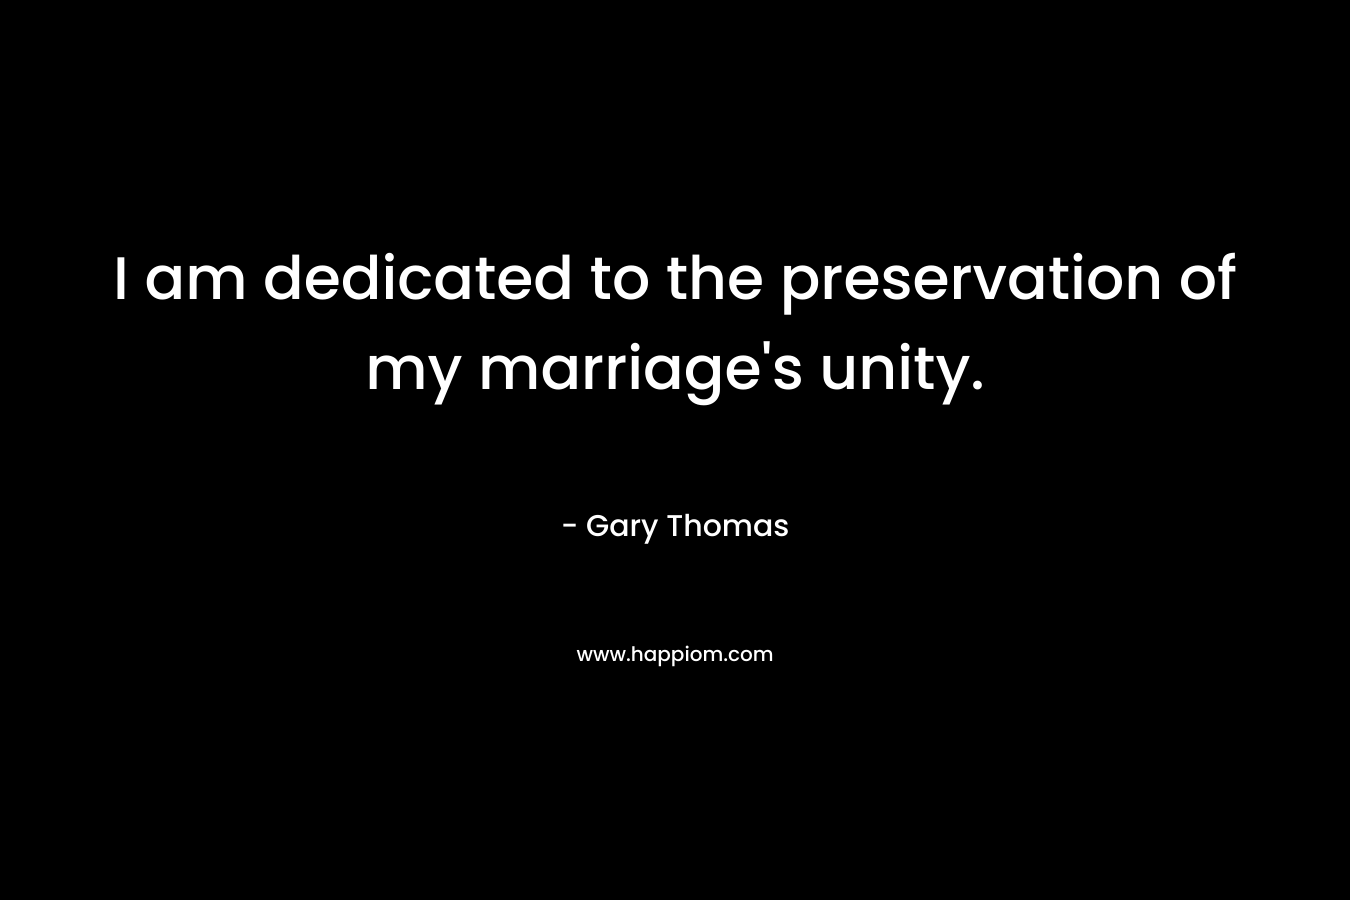 I am dedicated to the preservation of my marriage’s unity. – Gary Thomas